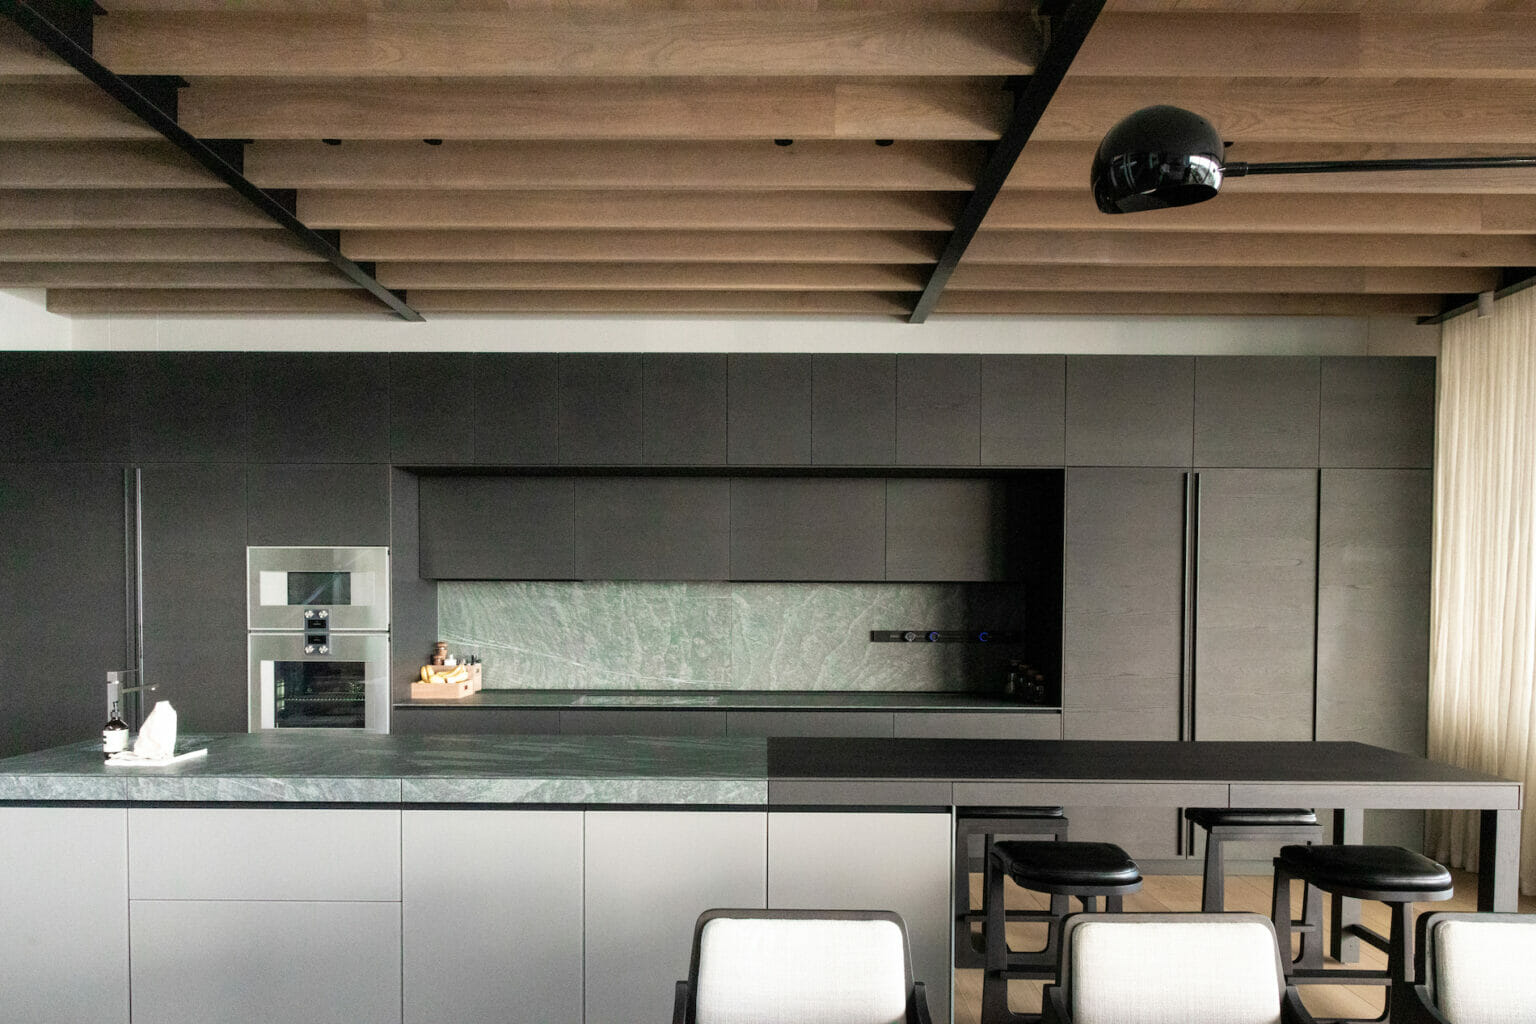 A textural combination of various stones, wood and glass bring the luxury kitchen to life